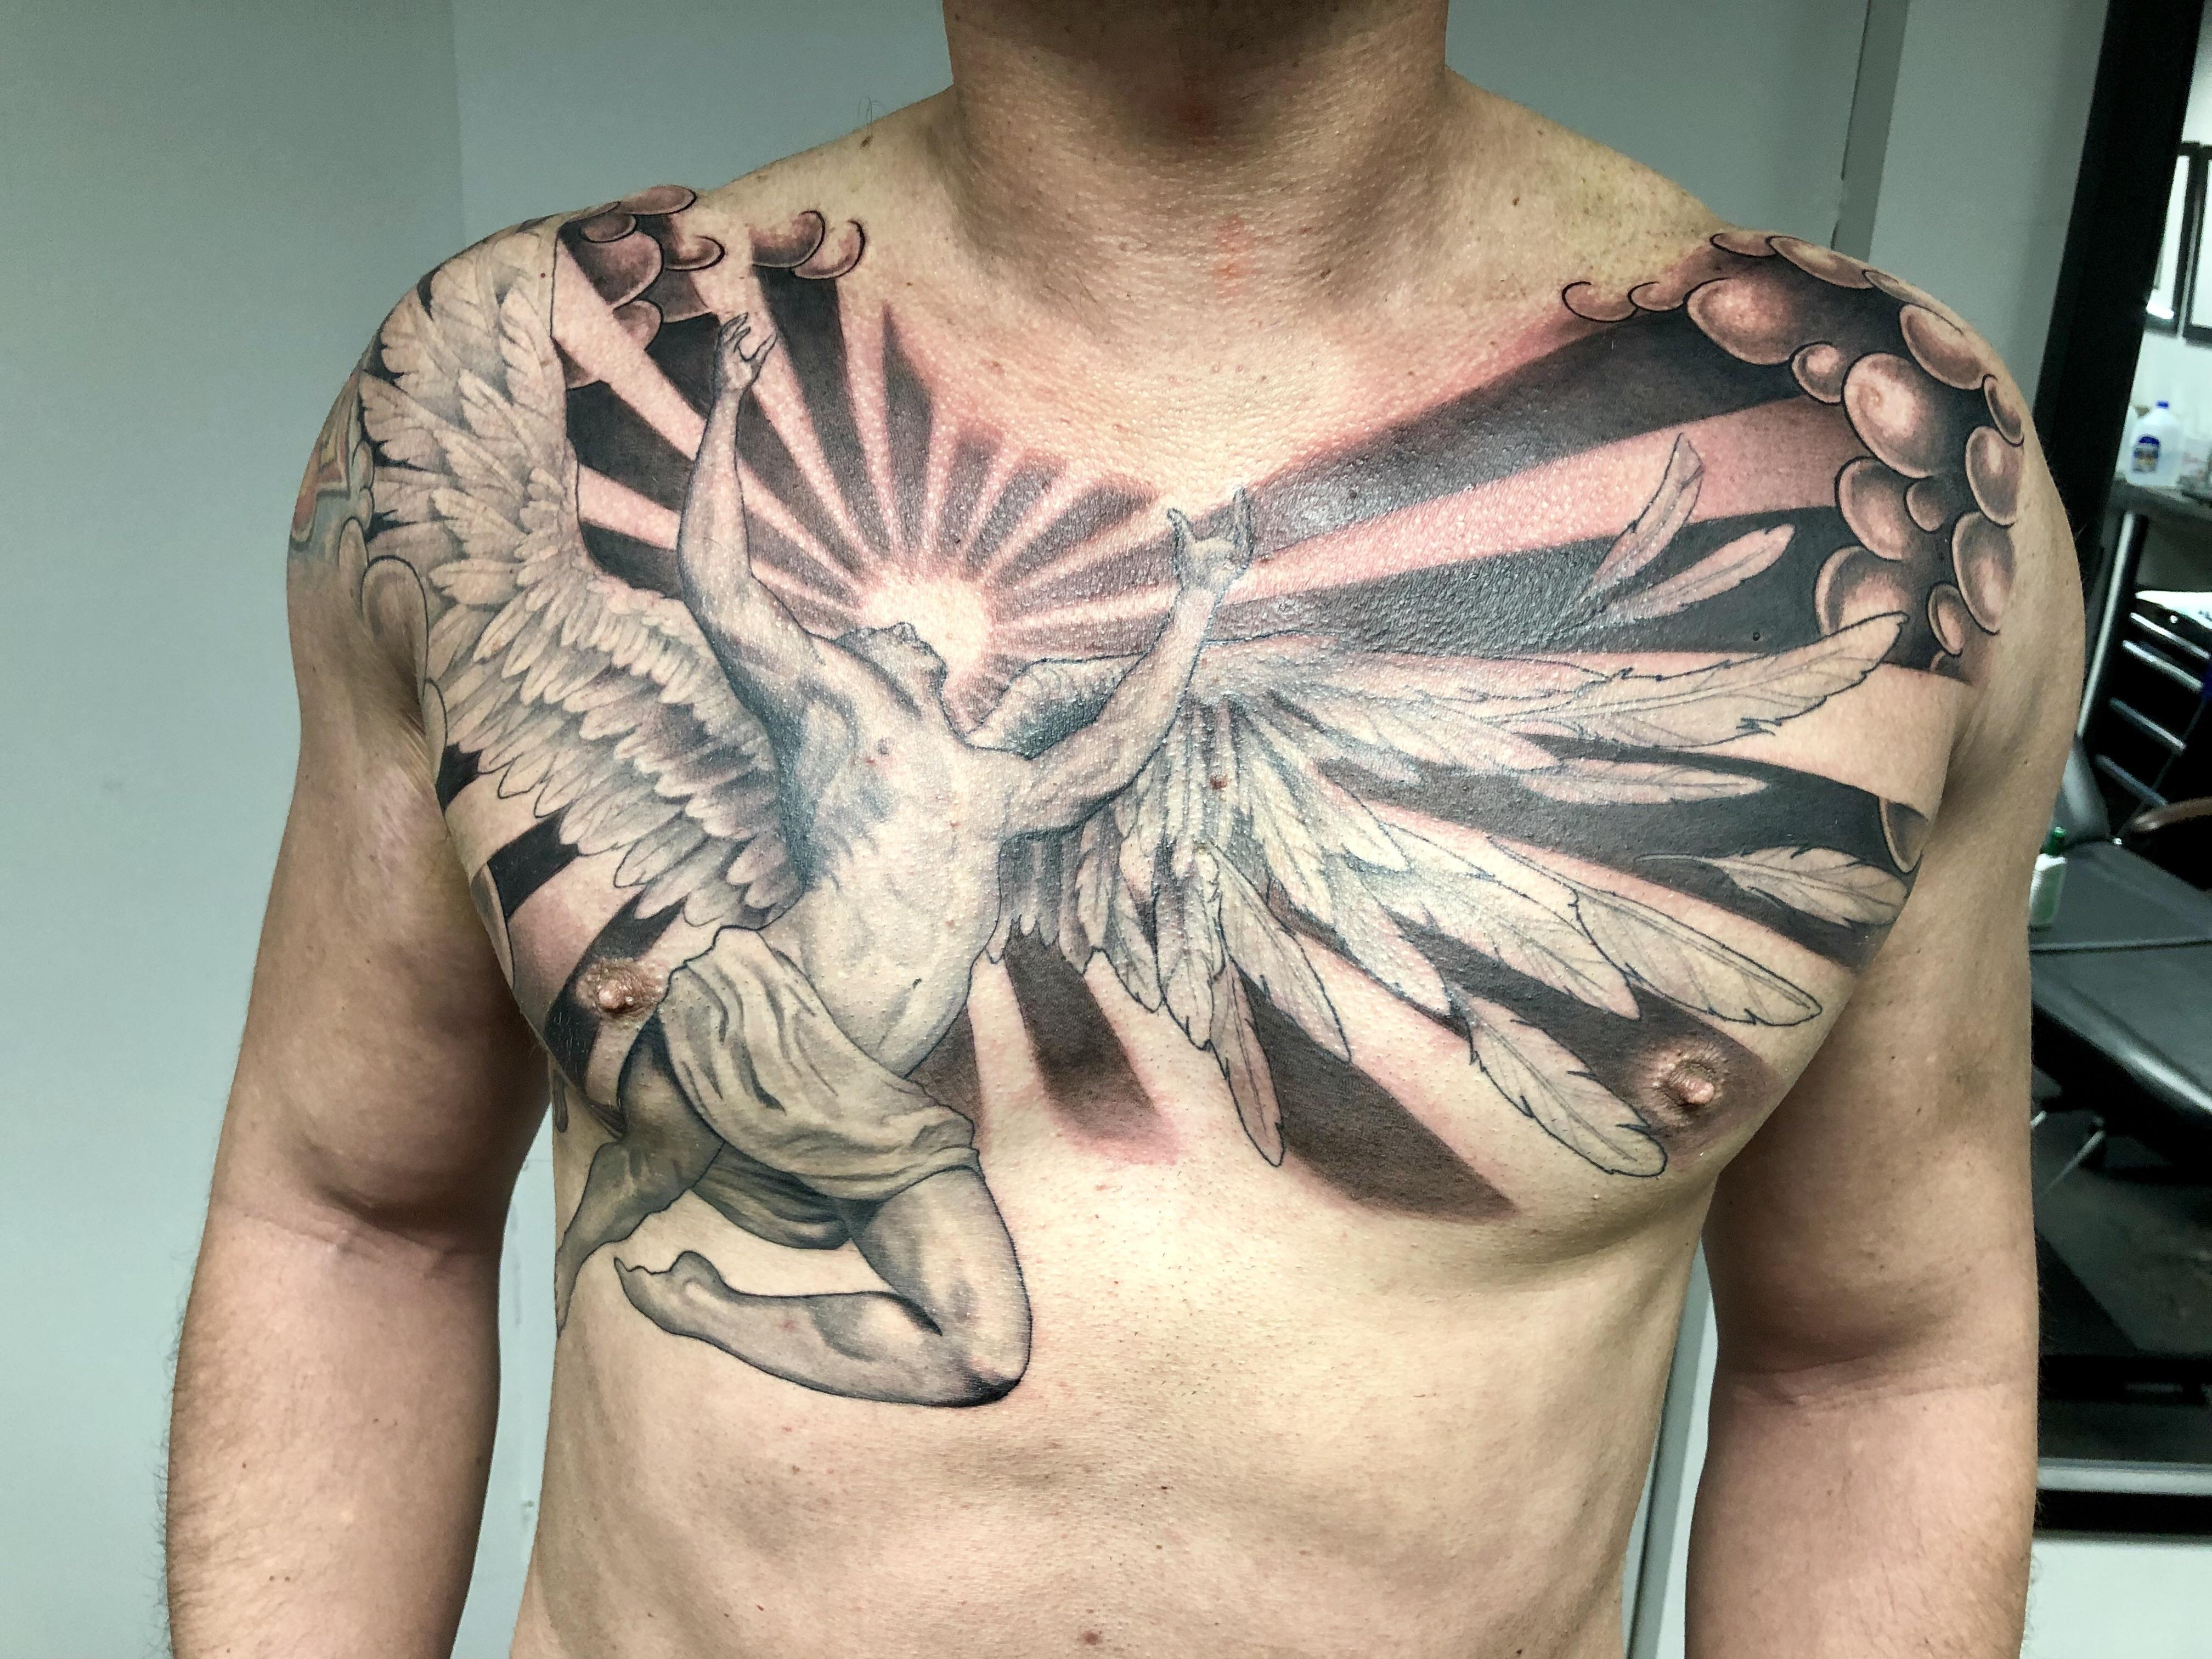 Icarus Chest Piece Fresh After Background Shading Mike Nance in size 4032 X 3024